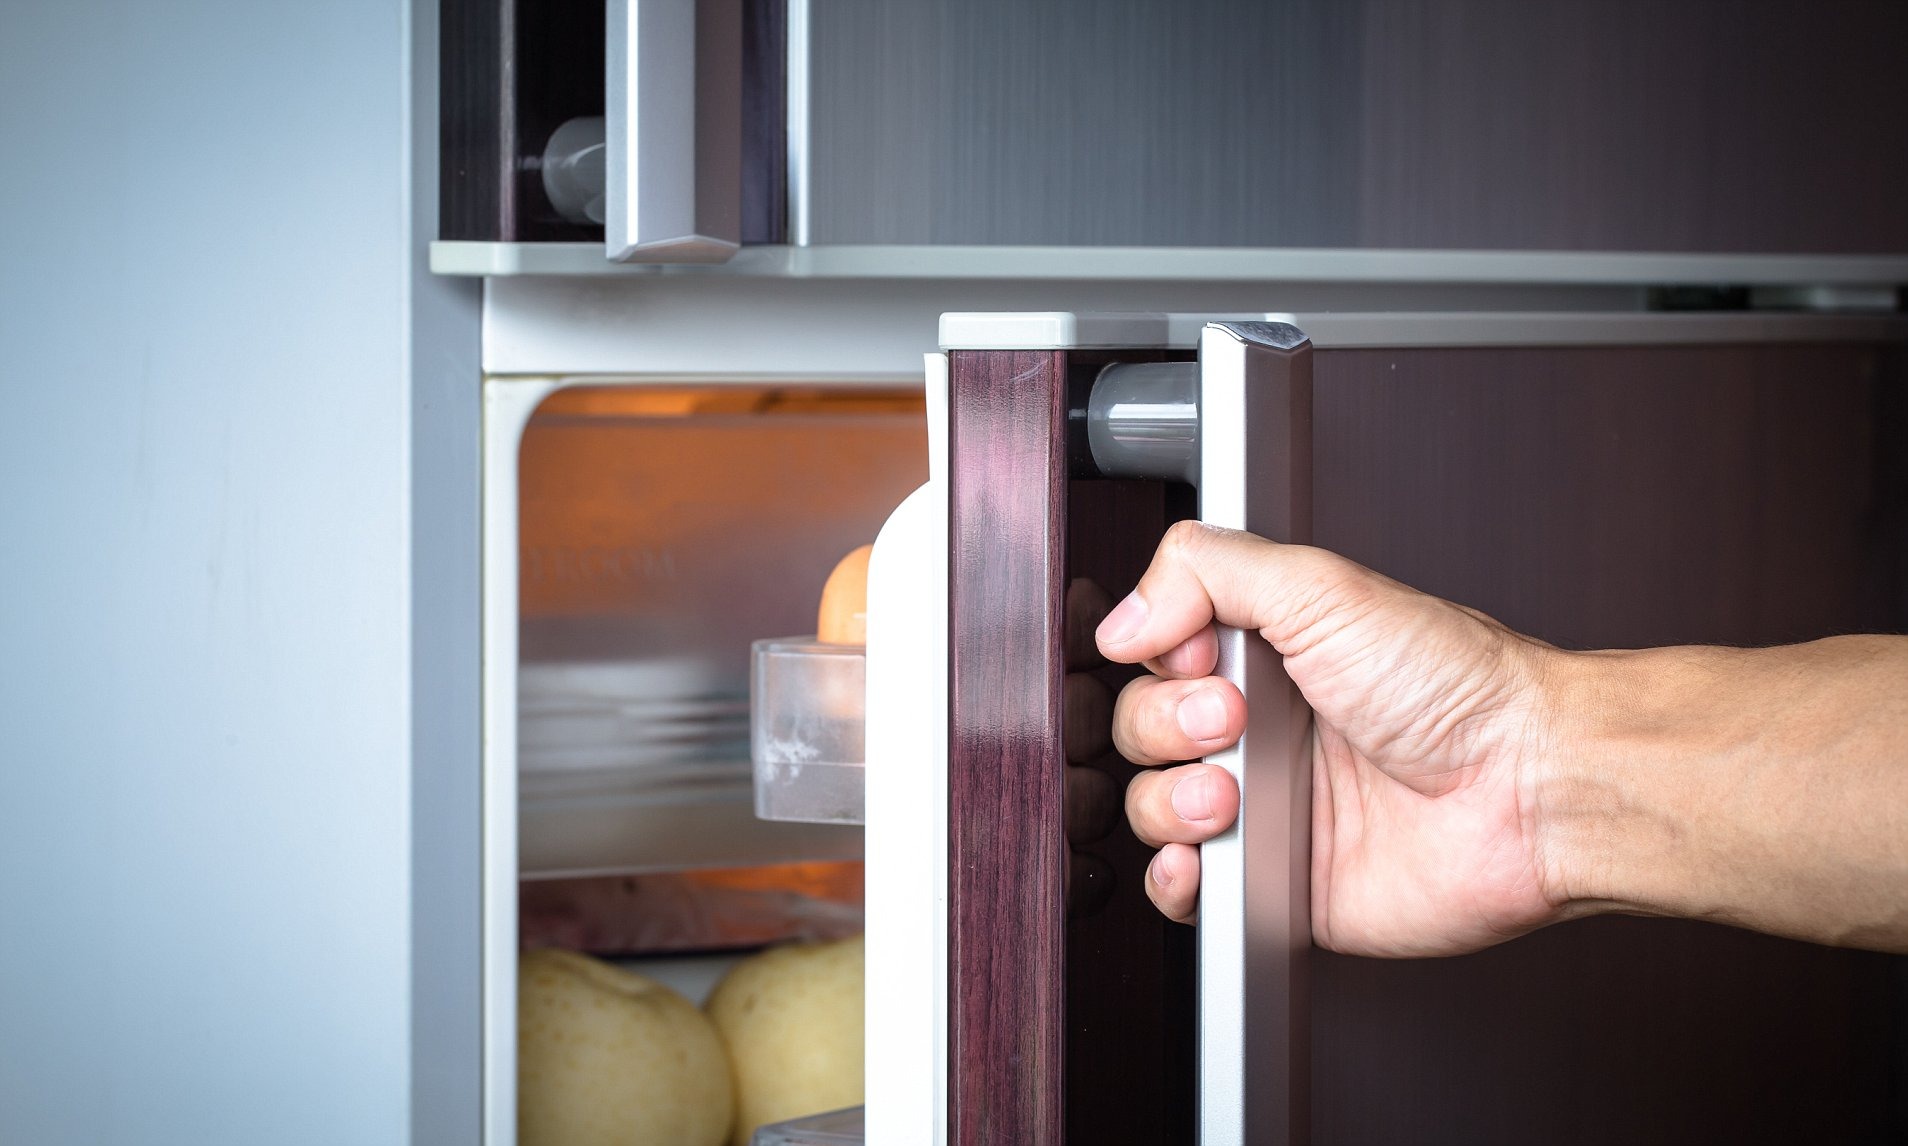 Cut the power to your current refrigerator